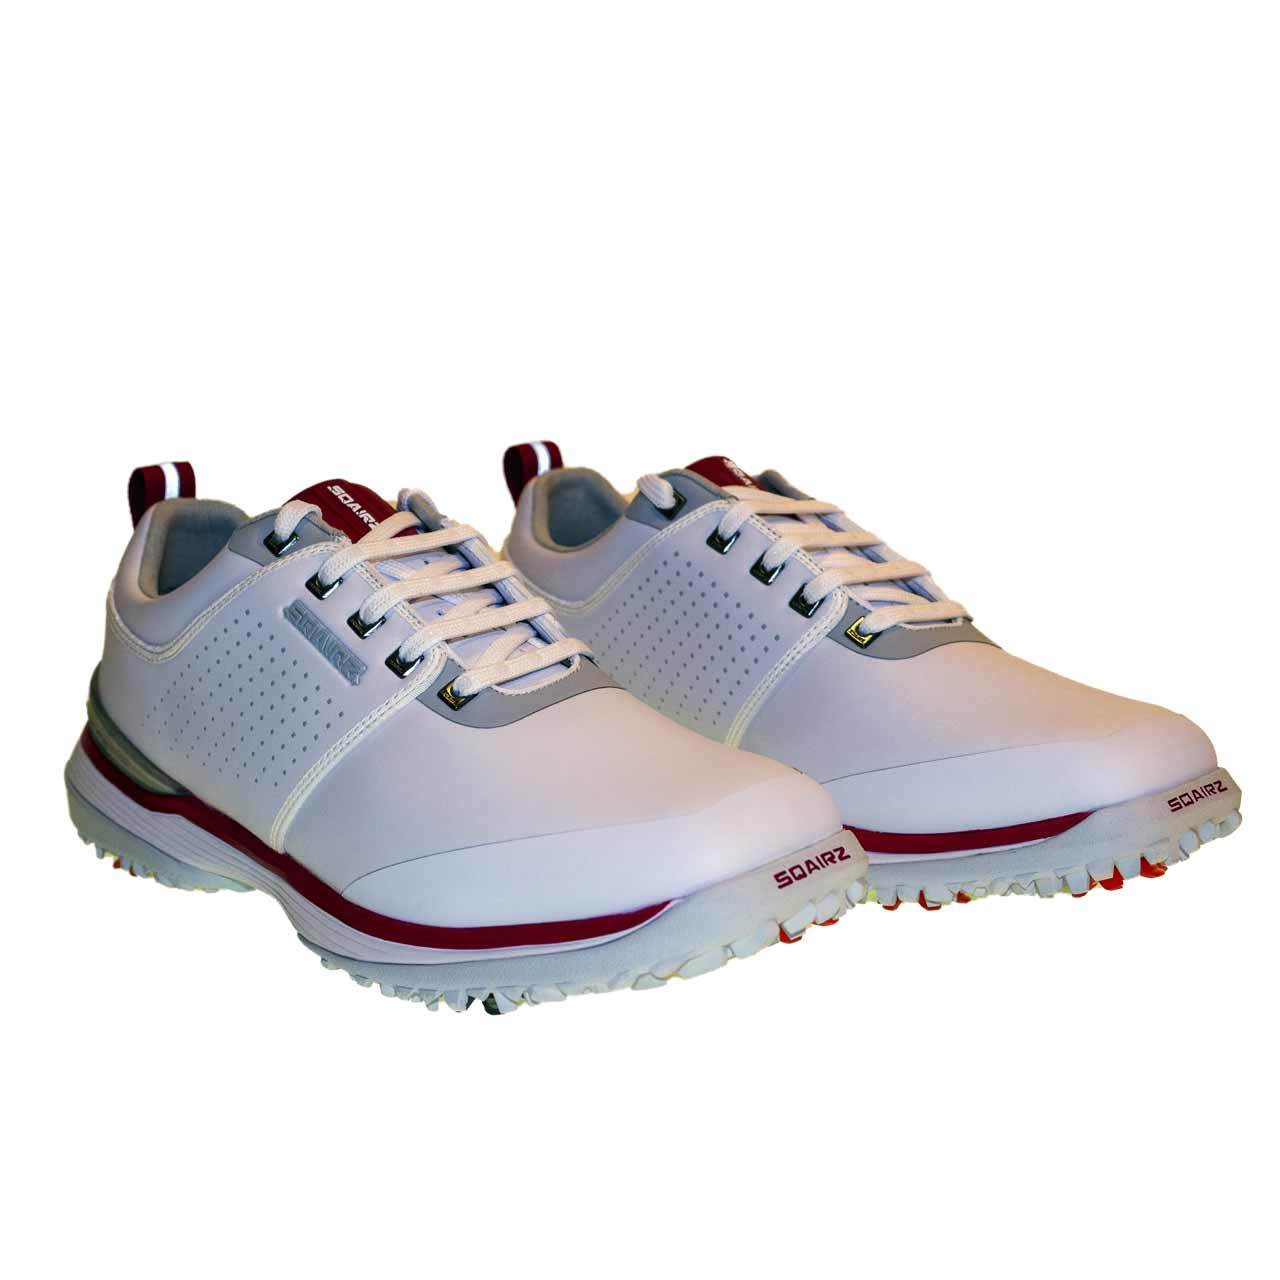 old man golf shoes